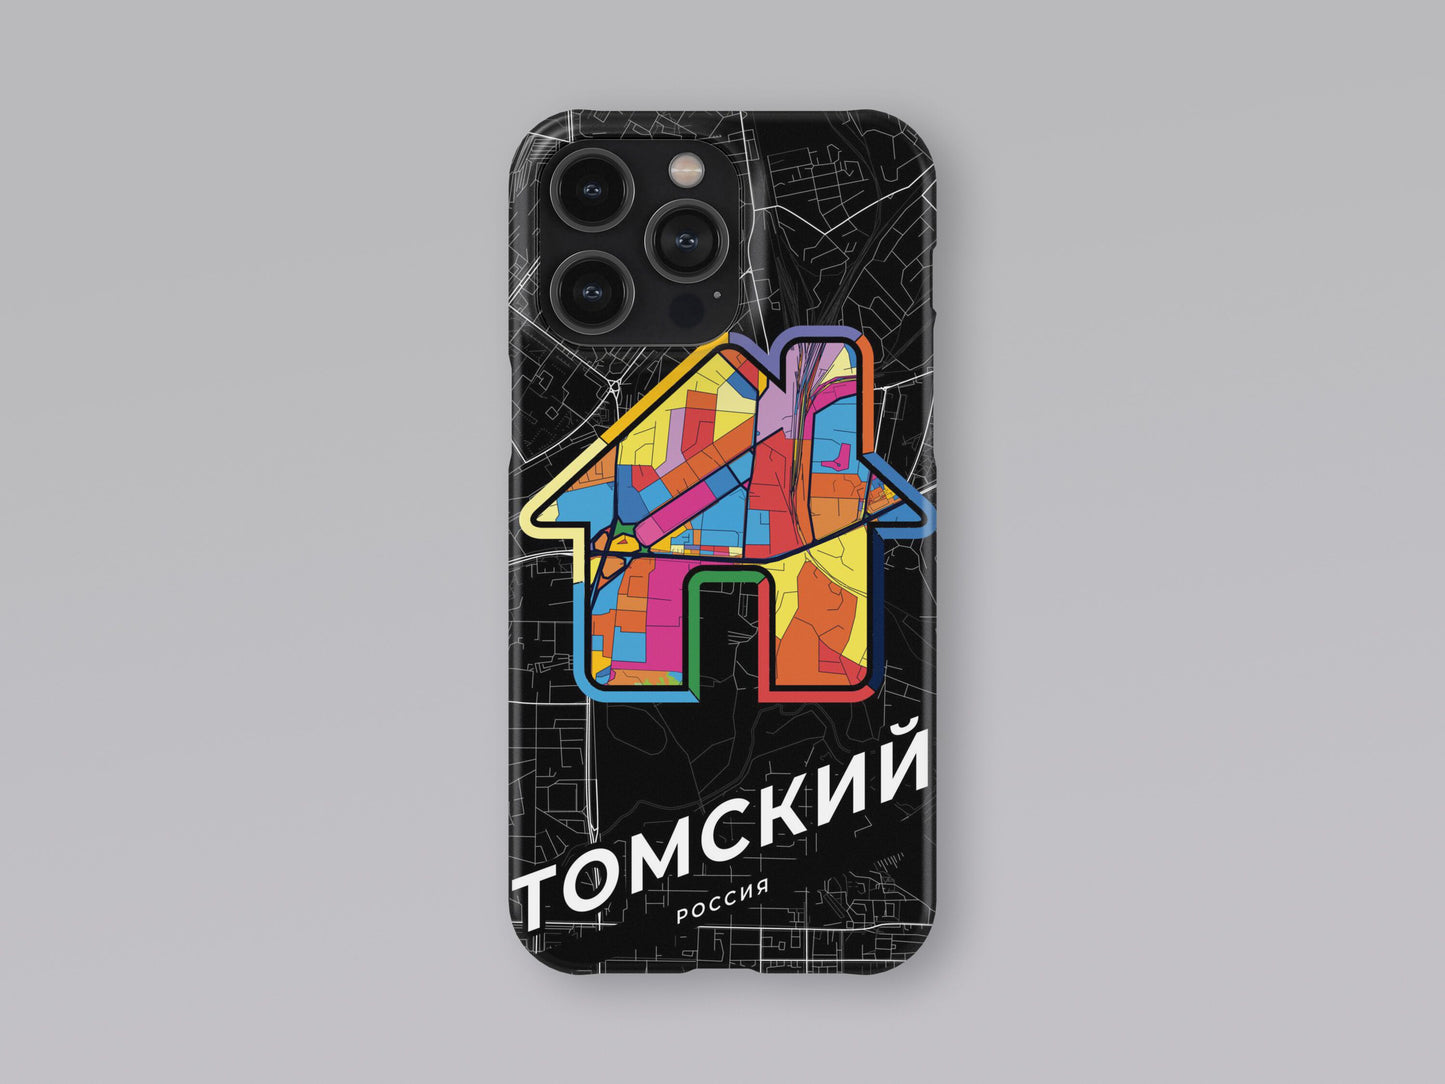 Tomsk Russia slim phone case with colorful icon 3